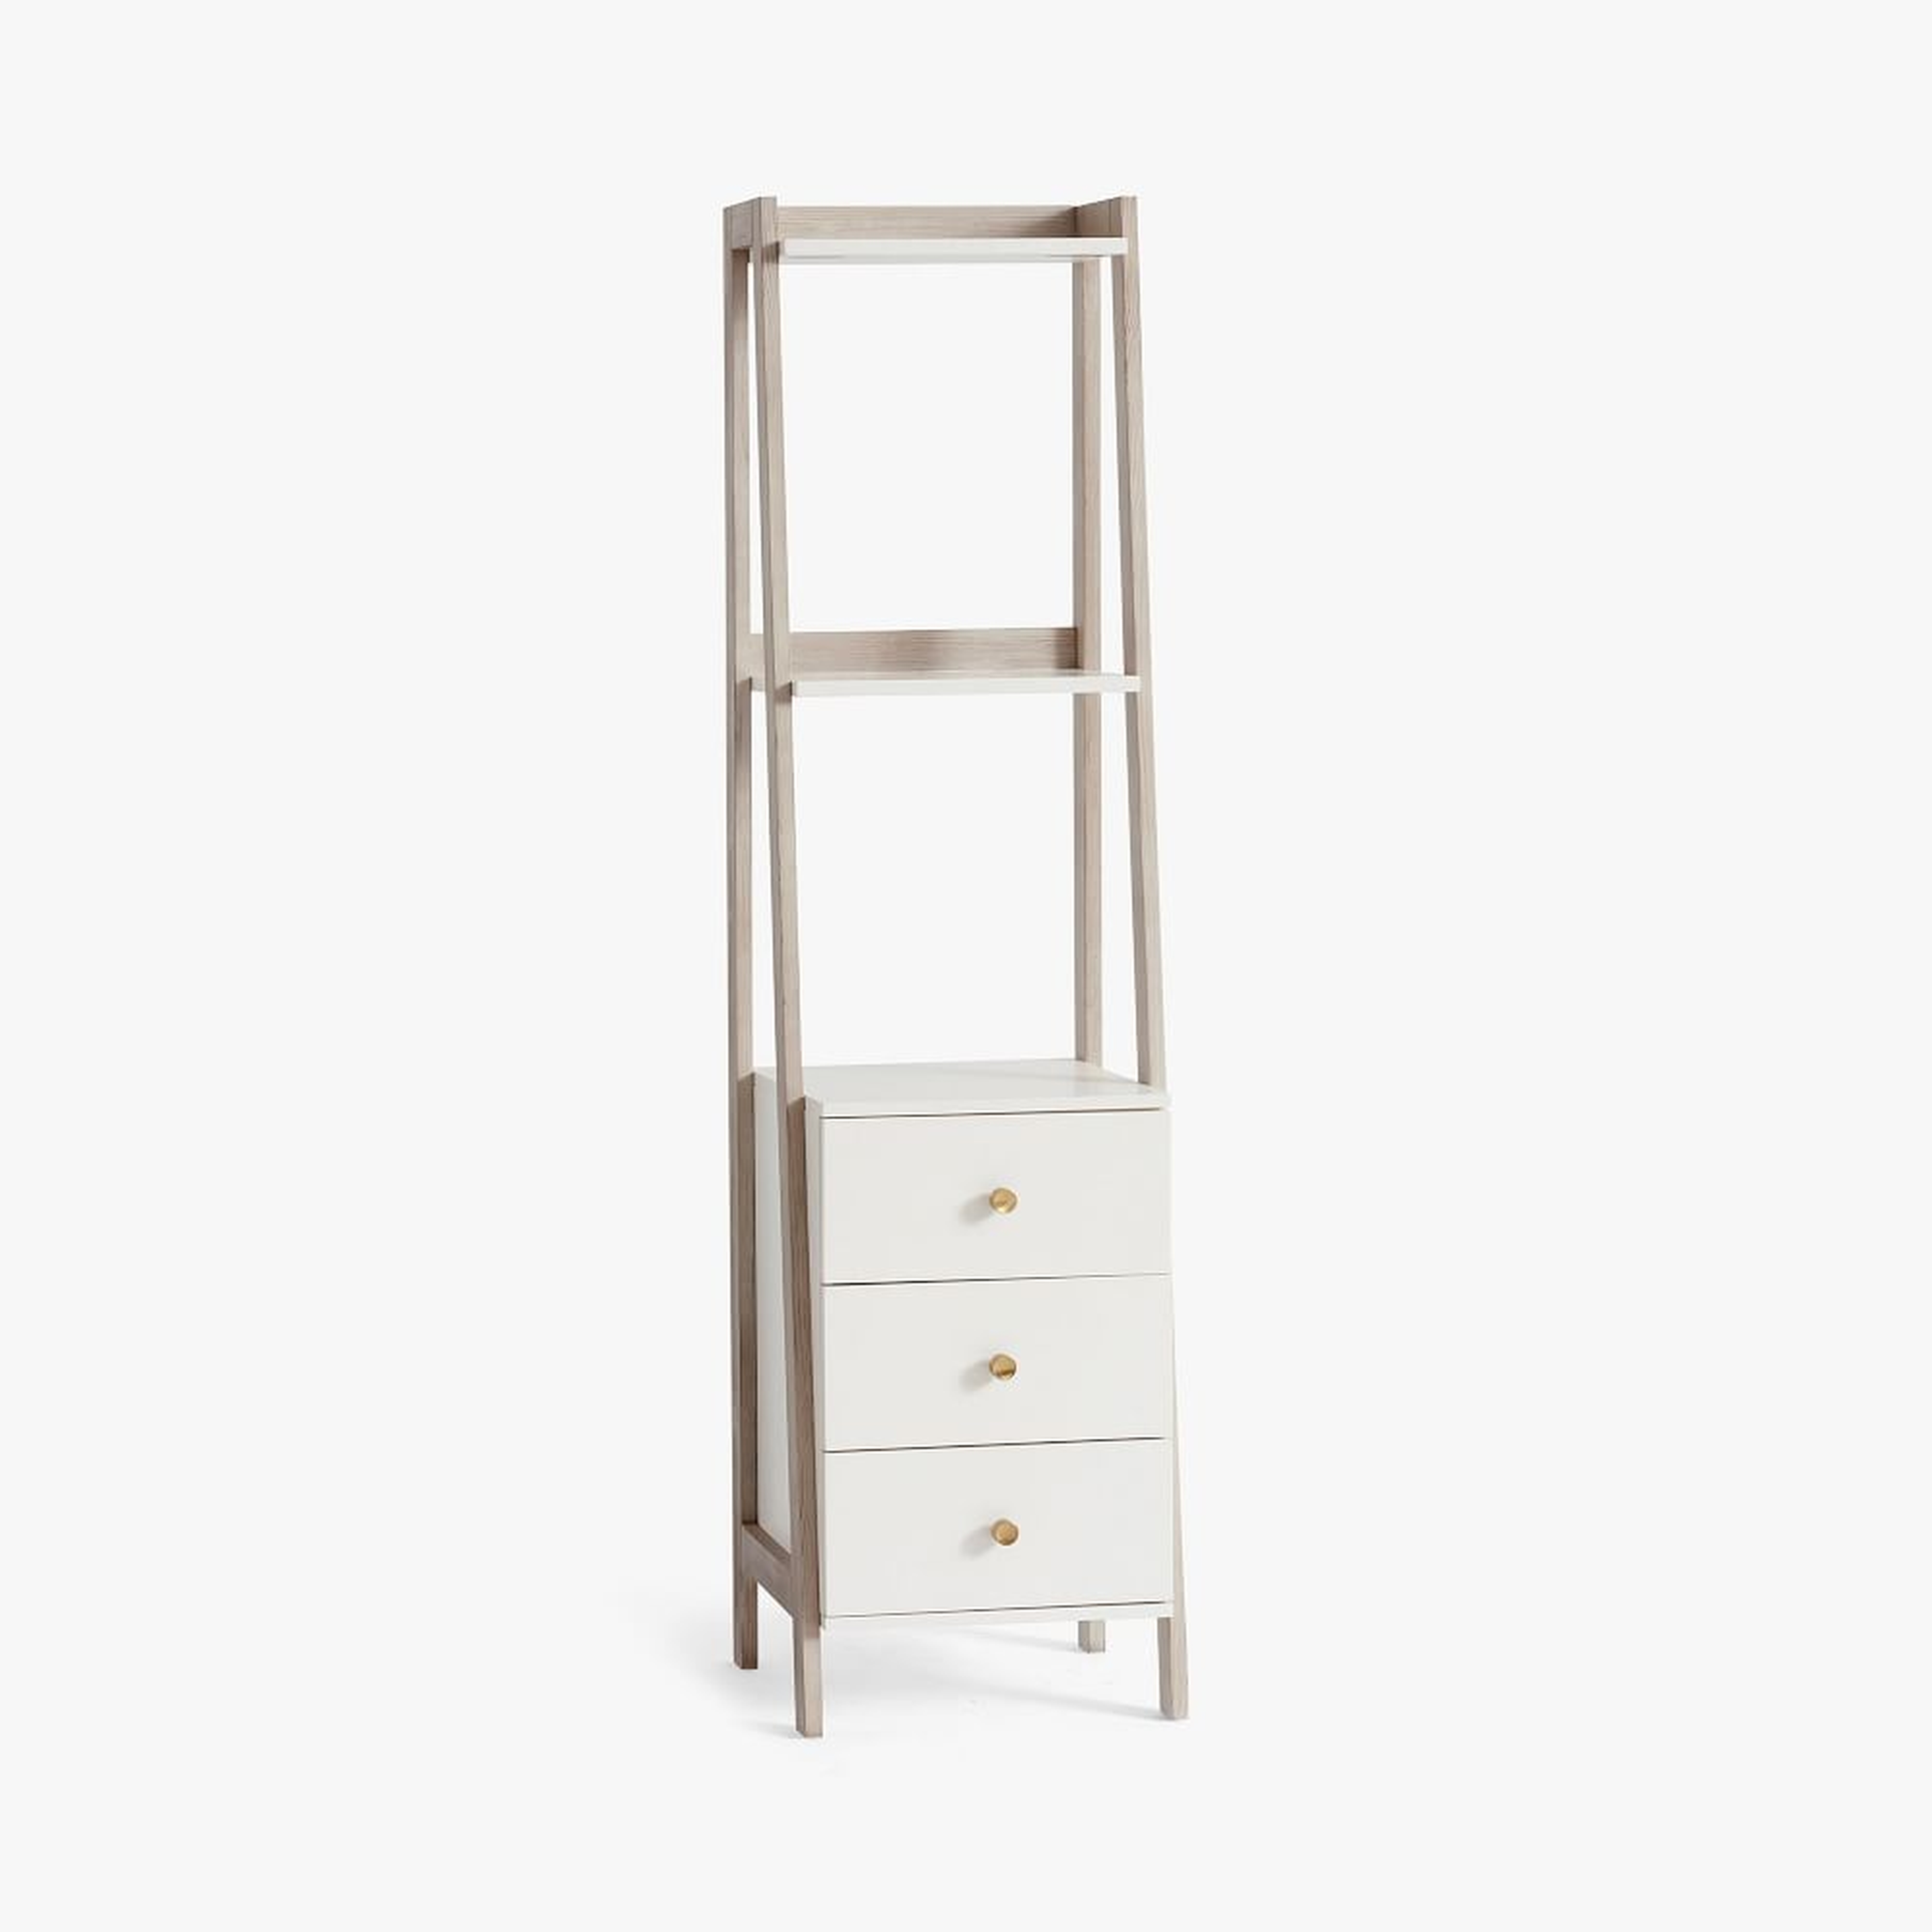 Highland Bookcase with Drawers, Weathered White, WE Kids - West Elm